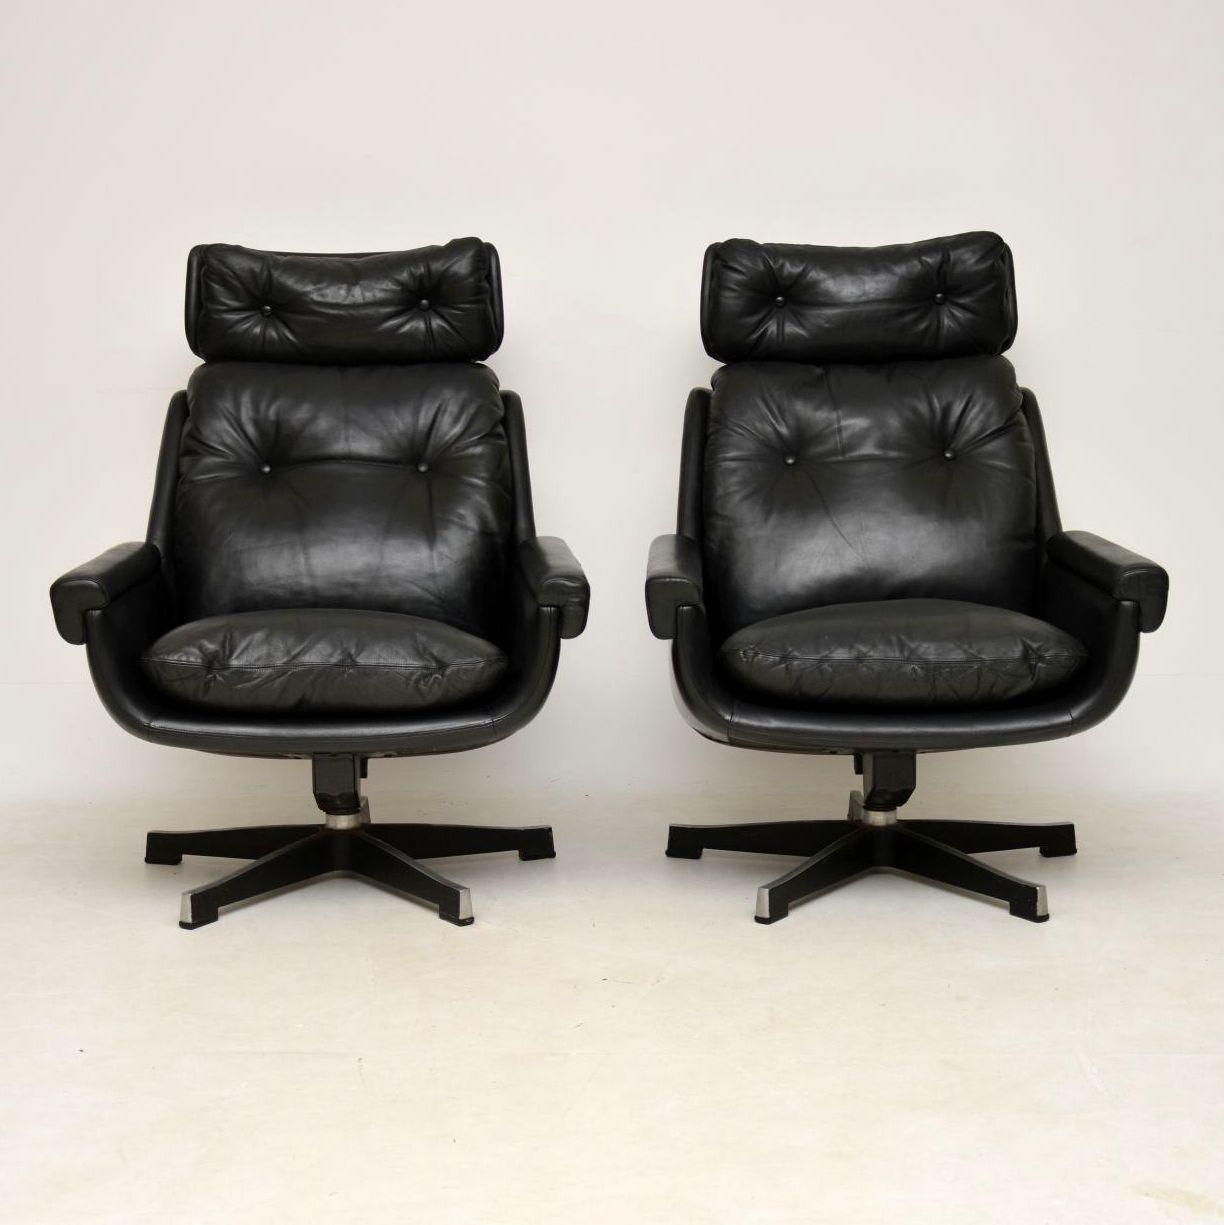 A stunning, top quality and unbelievably comfortable pair of vintage black leather armchairs, these were made in Finland by Peem, they date from the 1970s. They have a beautiful shape, sitting on well made splayed bases, they swivel and rock very